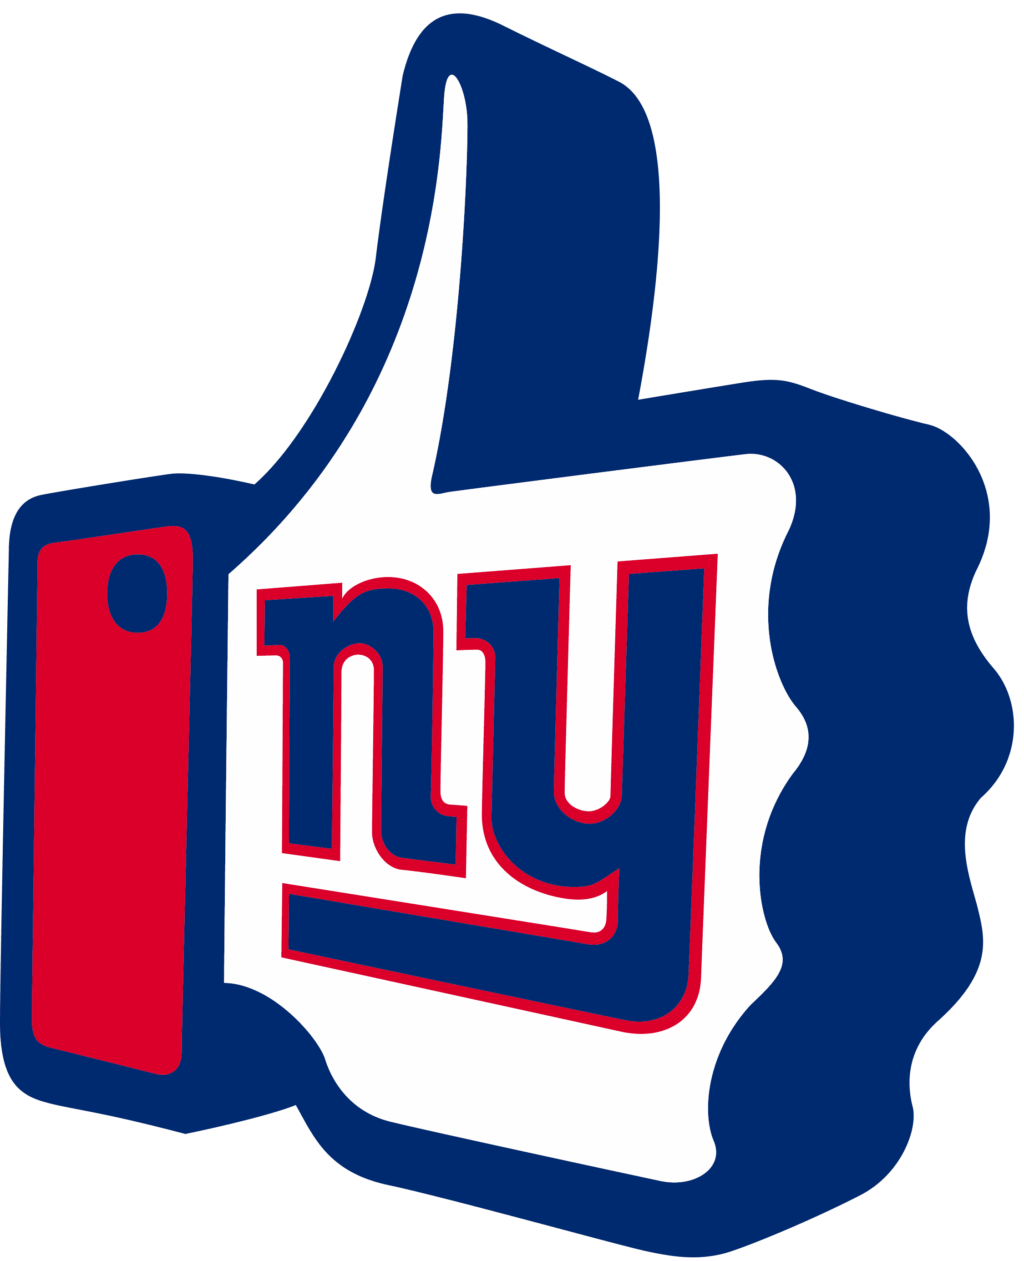 new york giants 24 NFL Logo New York Giants, New York Giants SVG, Vector New York Giants Clipart New York Giants American Football Kit New York Giants, SVG, DXF, PNG, American Football Logo Vector New York Giants EPS download NFL-files for silhouette, New York Giants files for clipping.